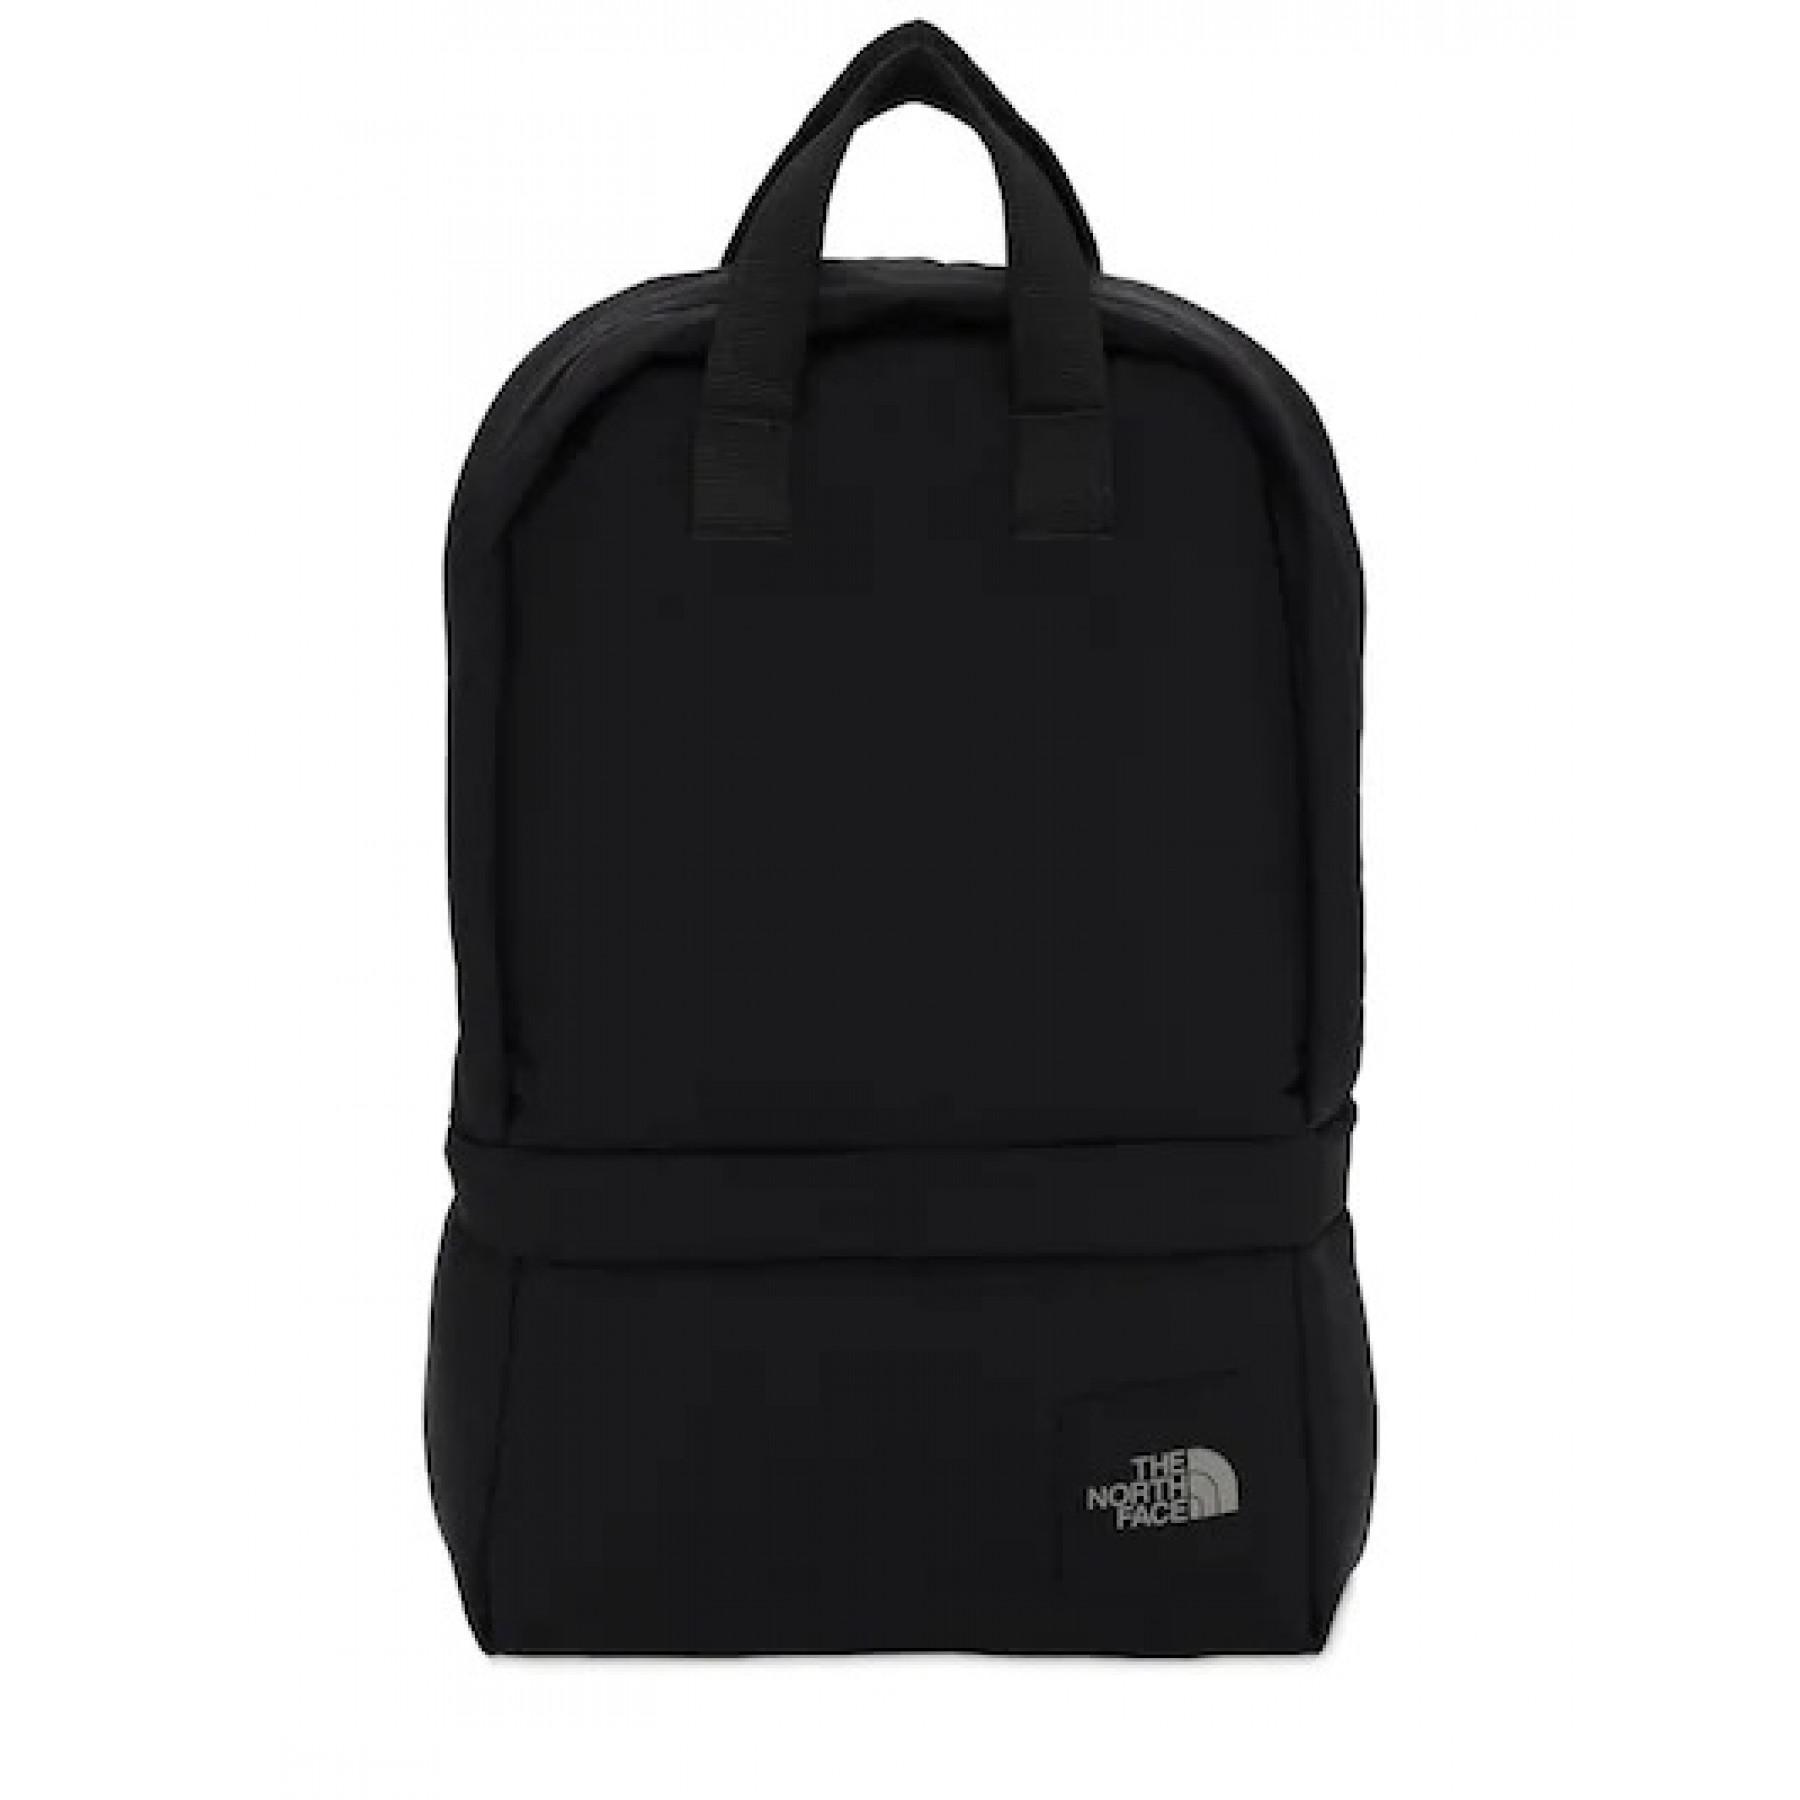 Borsa The North Face City Voyager Daypack